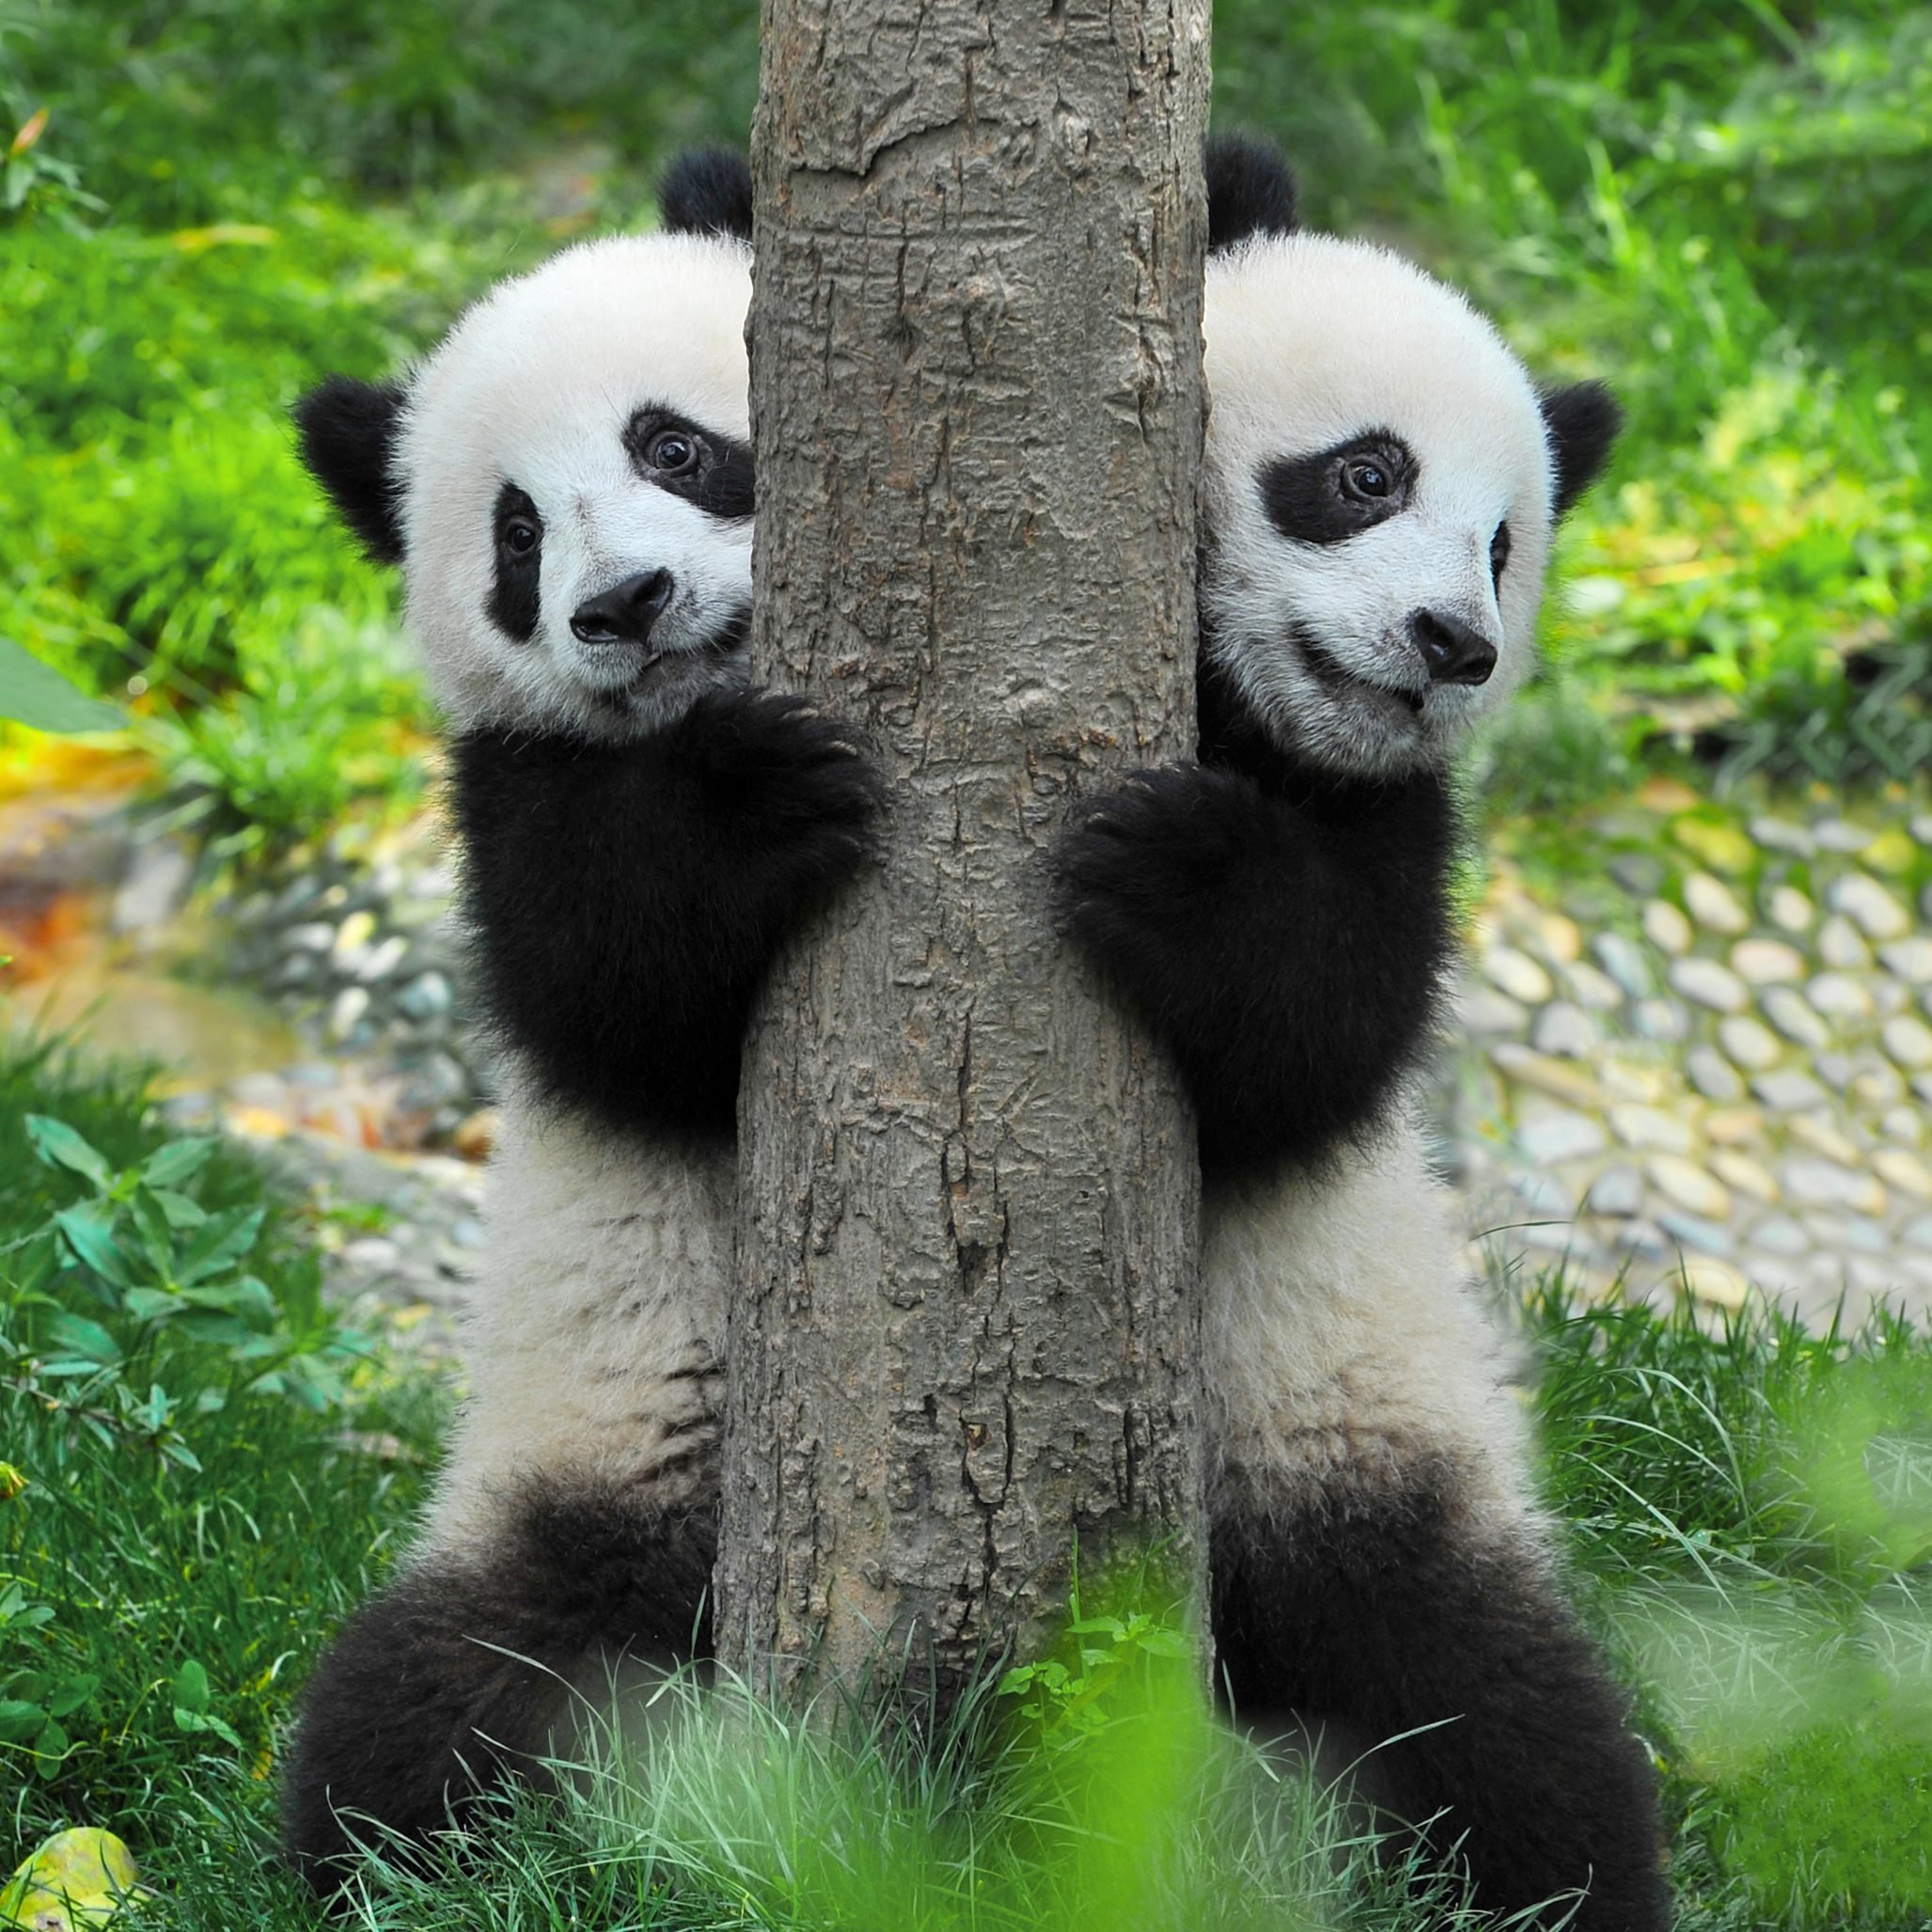 How Many Giant Pandas Are Left in the World? Reader's Digest